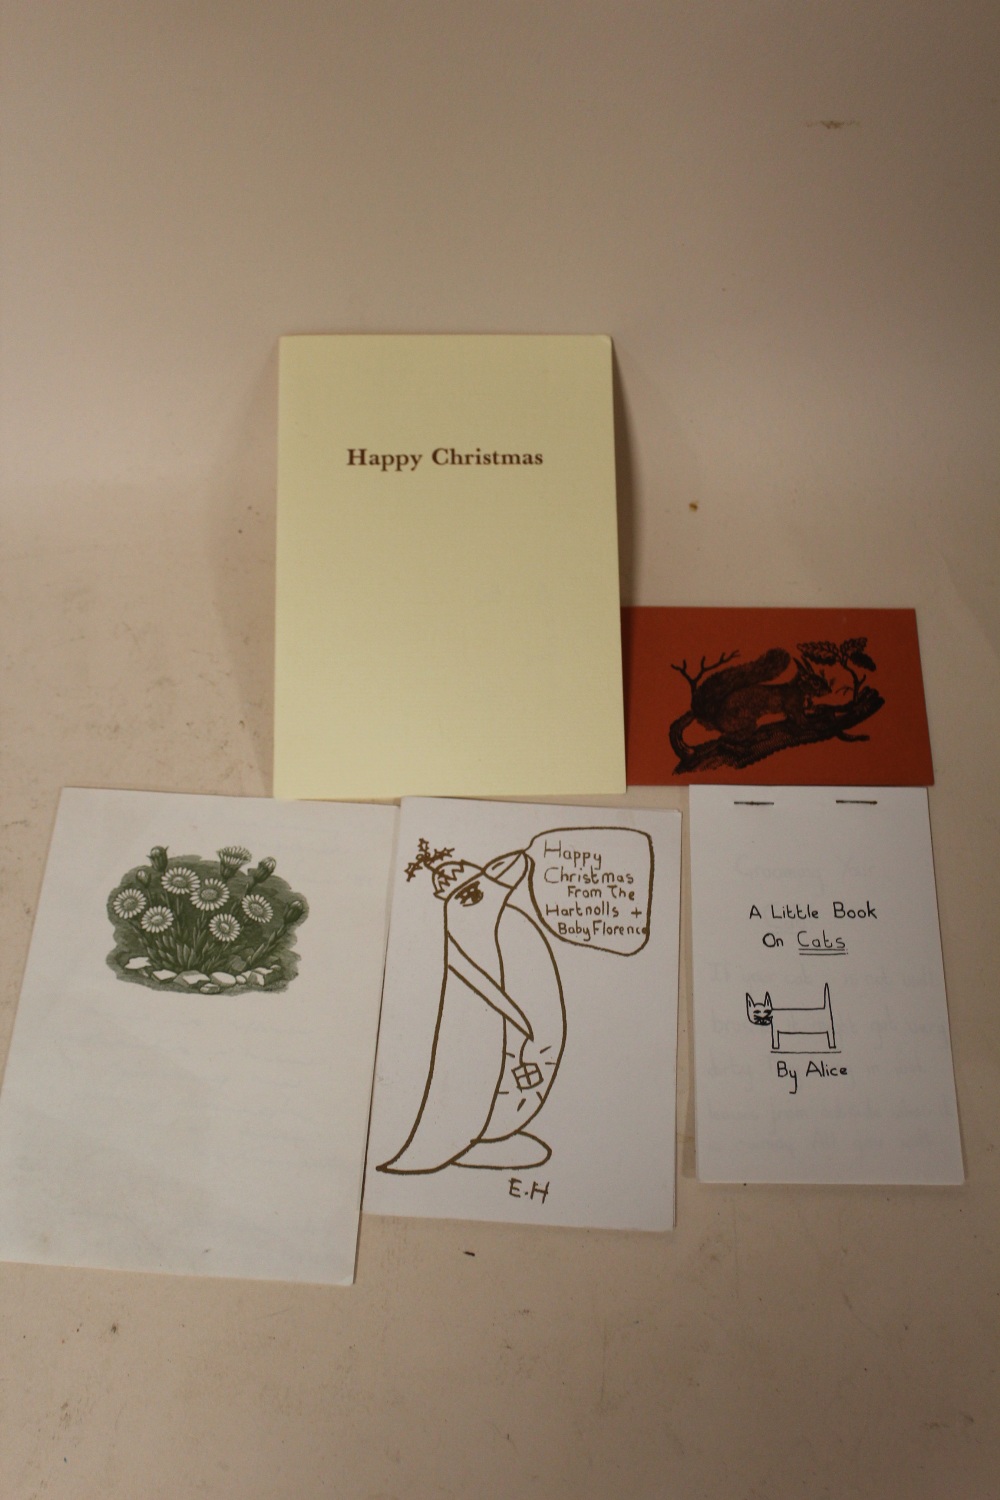 JULIAN HARTNOLL. Two Christmas cards signed by Hartnoll and dated 1987 and 1984, one lithograph